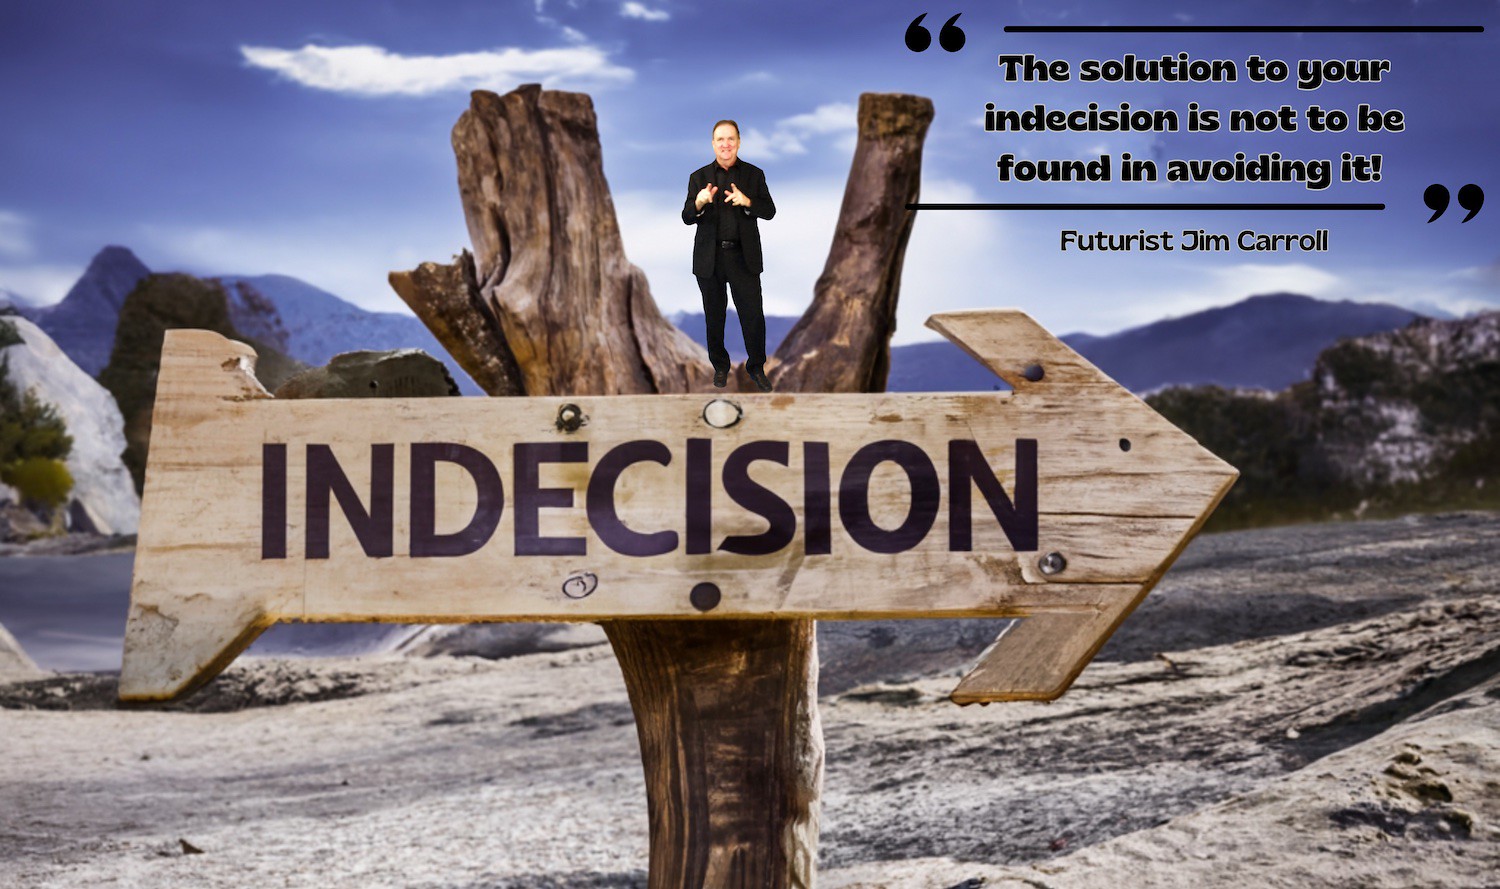 "The solution to your indecision is not to be found in avoiding it!" - Futurist Jim Carroll